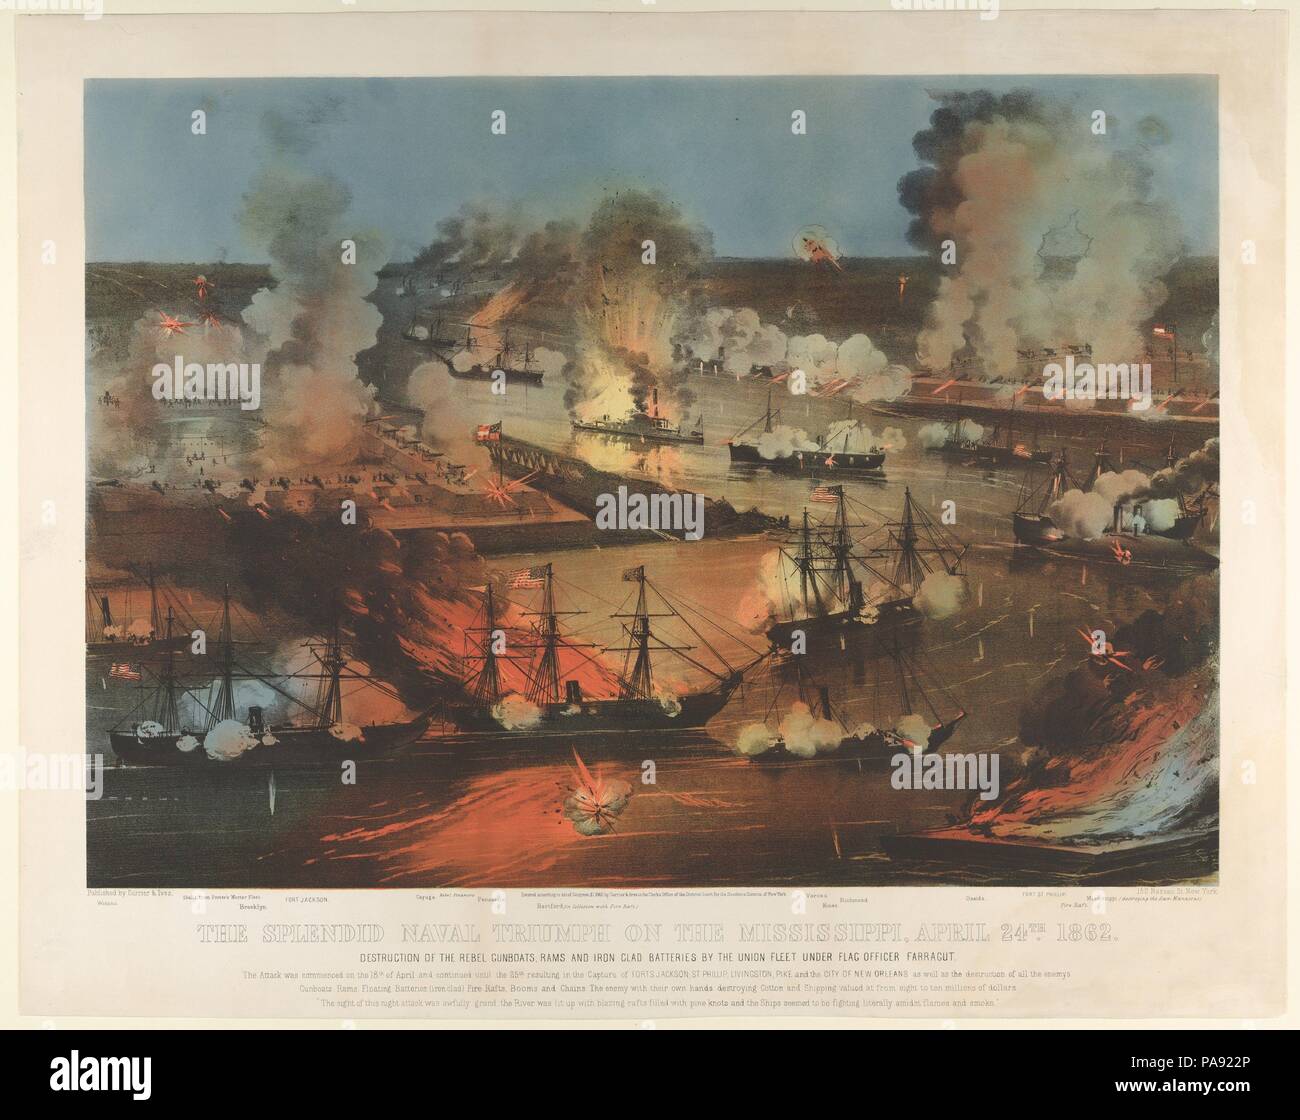 The Splendid Naval Triumph on the Mississippi, April 24th, 1862: Destruction of the Rebel Gunboats, Rams, and Iron Clad Batteries by the Union Fleet under Flag Officer Farragut. Dimensions: Image: 15 7/8 × 22 1/4 in. (40.4 × 56.5 cm)  Sheet: 19 3/4 × 24 13/16 in. (50.2 × 63 cm). Publisher: Currier & Ives (American, active New York, 1857-1907). Date: 1862.  Gaining control of the Mississippi River and Confederate trade were key Union goals from the start of the Civil War, and led President Abraham Lincoln to declare a blockade of Southern ports in April 1861. This print records a Northern assau Stock Photo